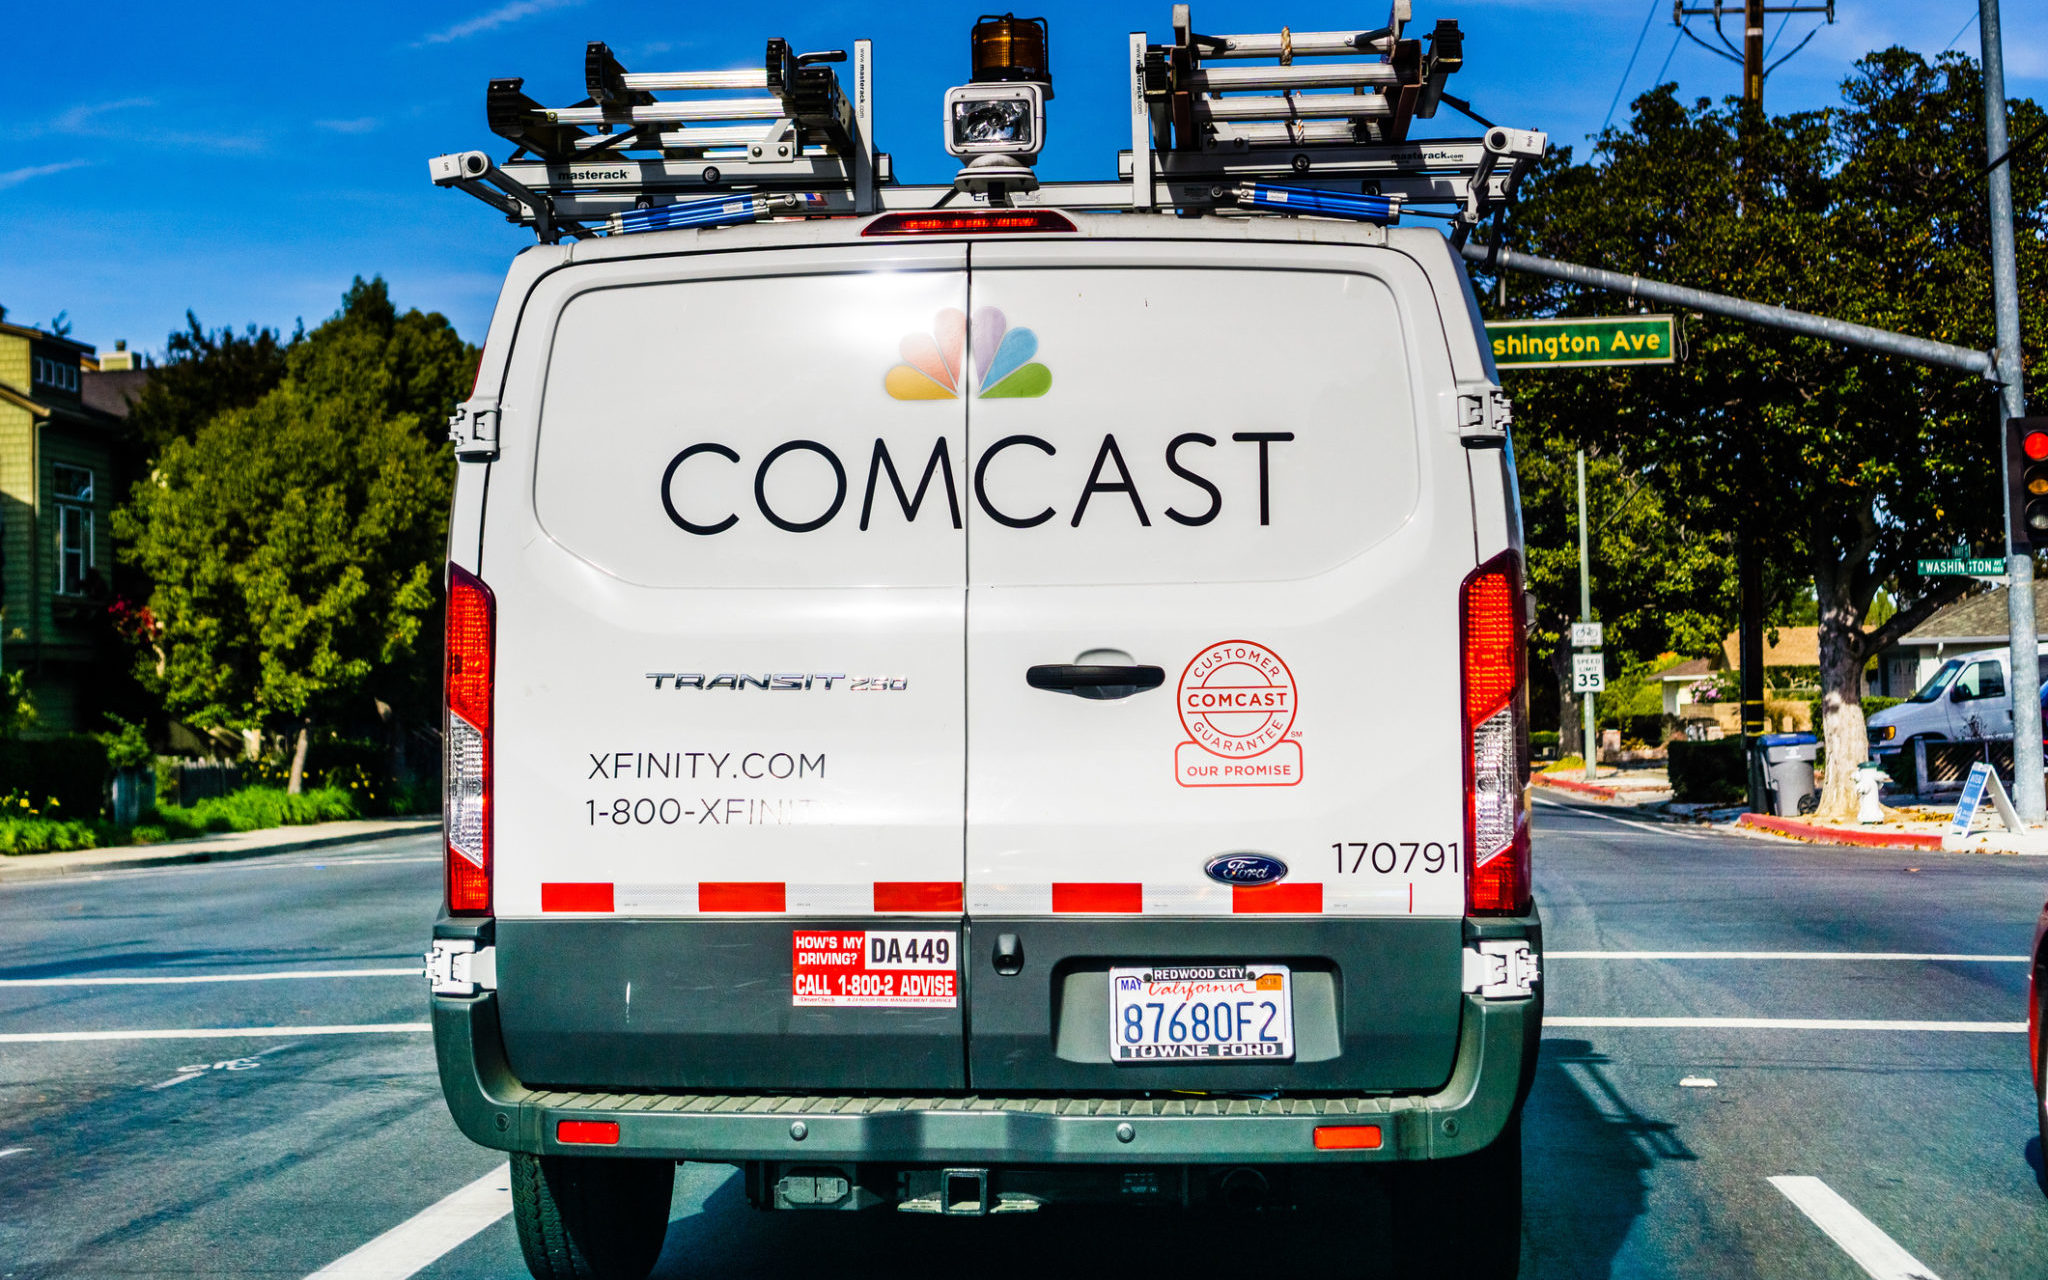 The Recap: Comcast Price Hikes, DIRECTV-Tegna Fight Gets Uglier, and More